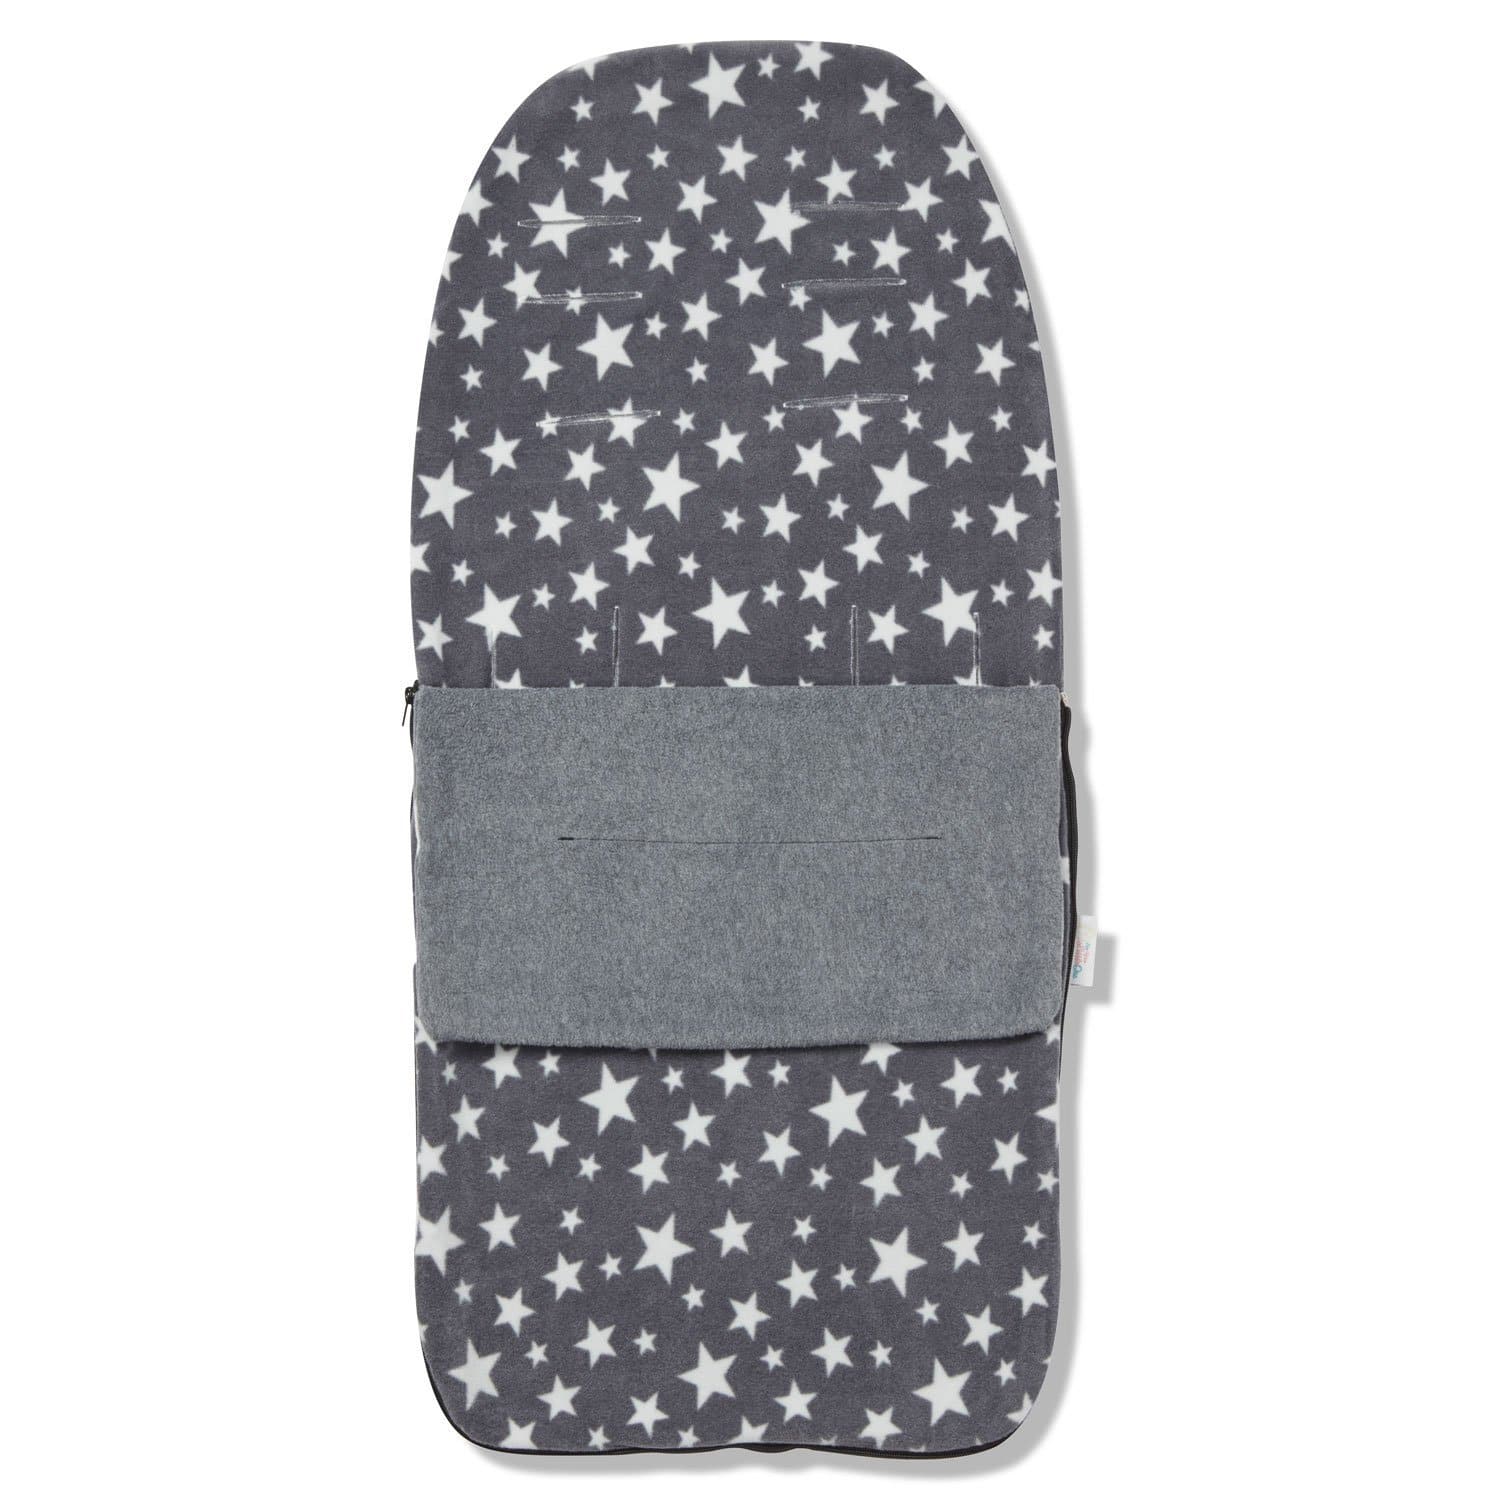 Snuggle Summer Footmuff Compatible with Firstwheels - For Your Little One